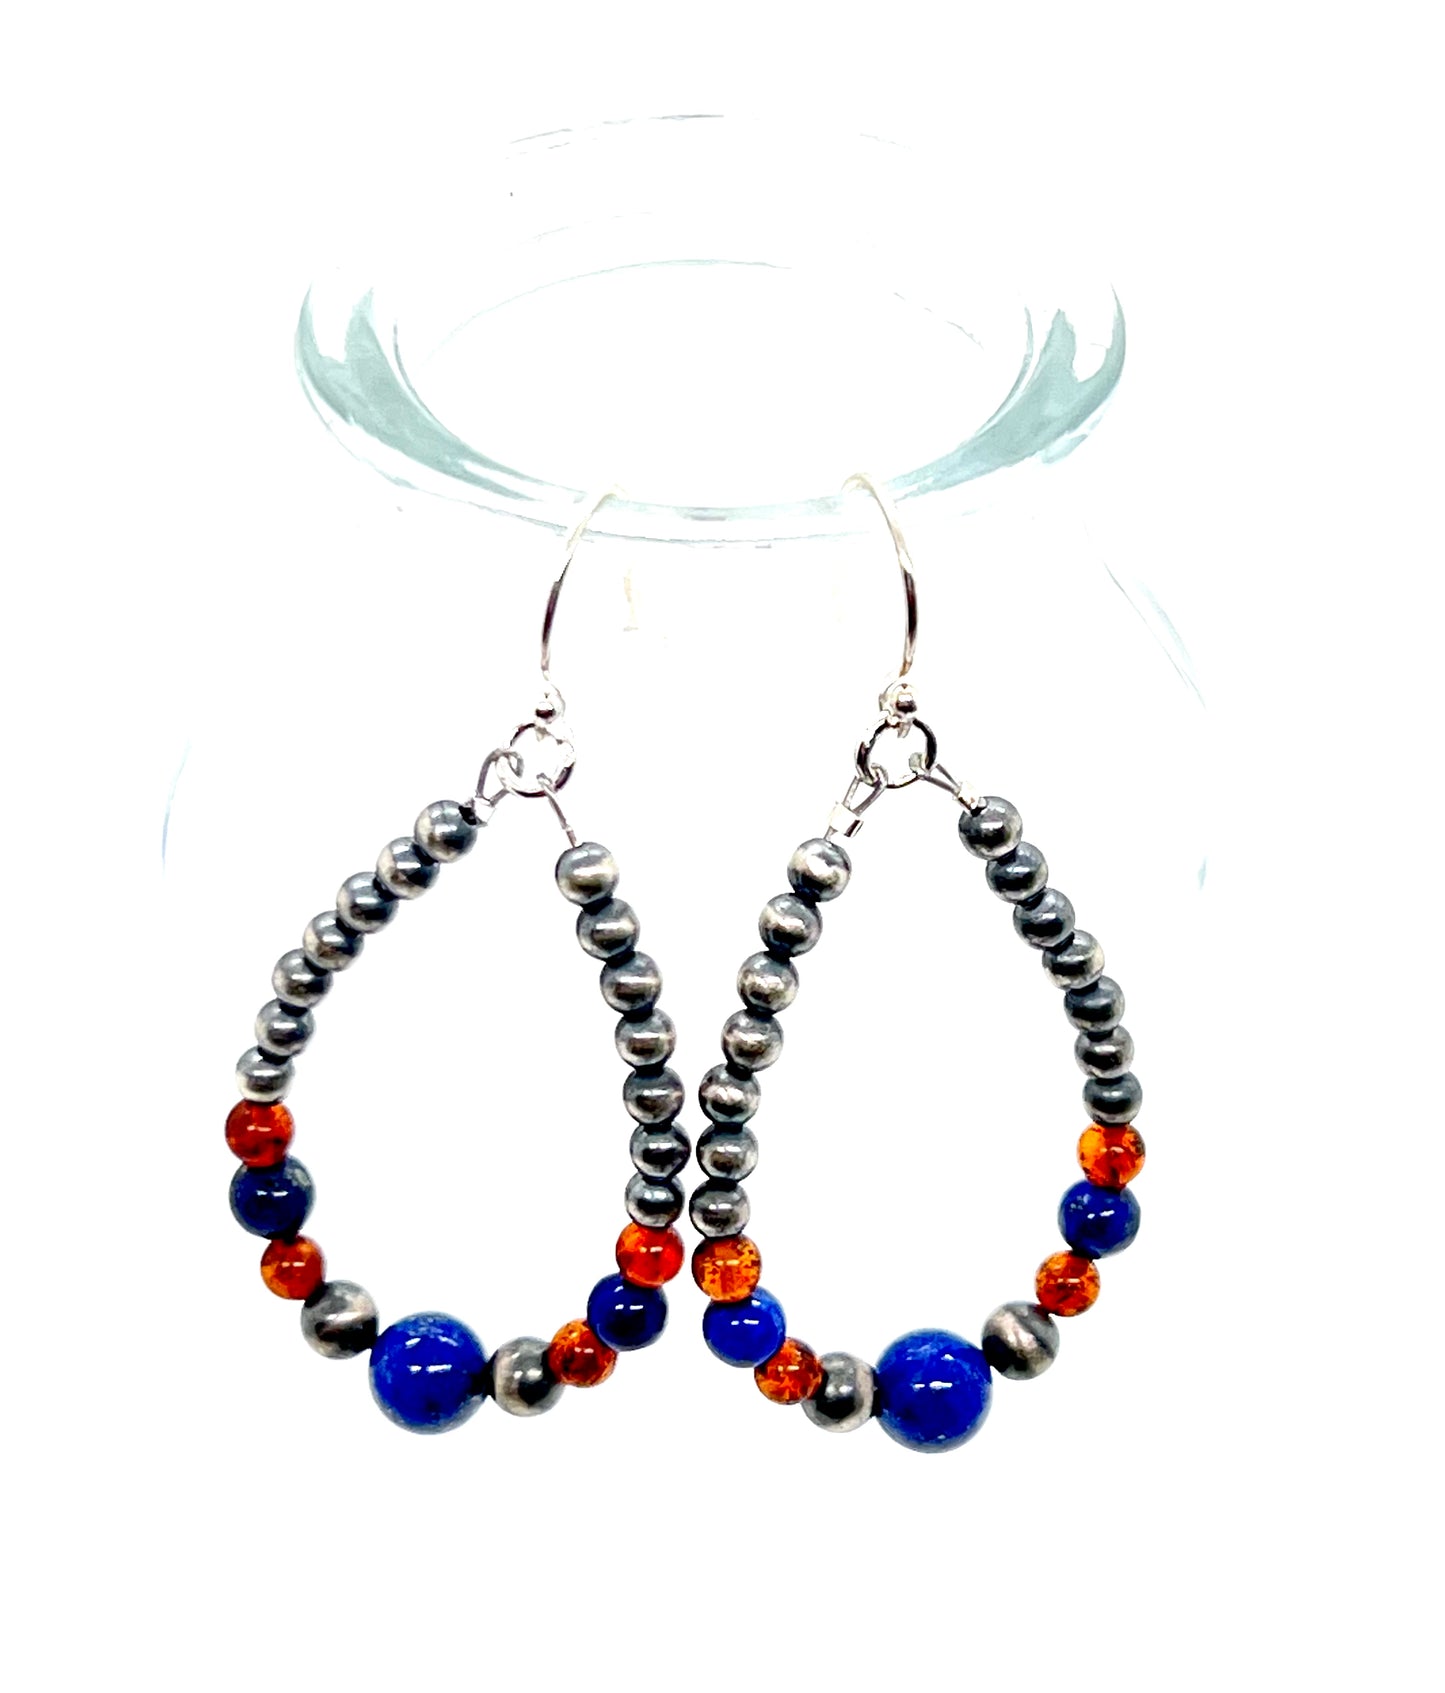 Bonnie with Navajo Pearls, Lapis Lazuli and Baltic Amber Beads